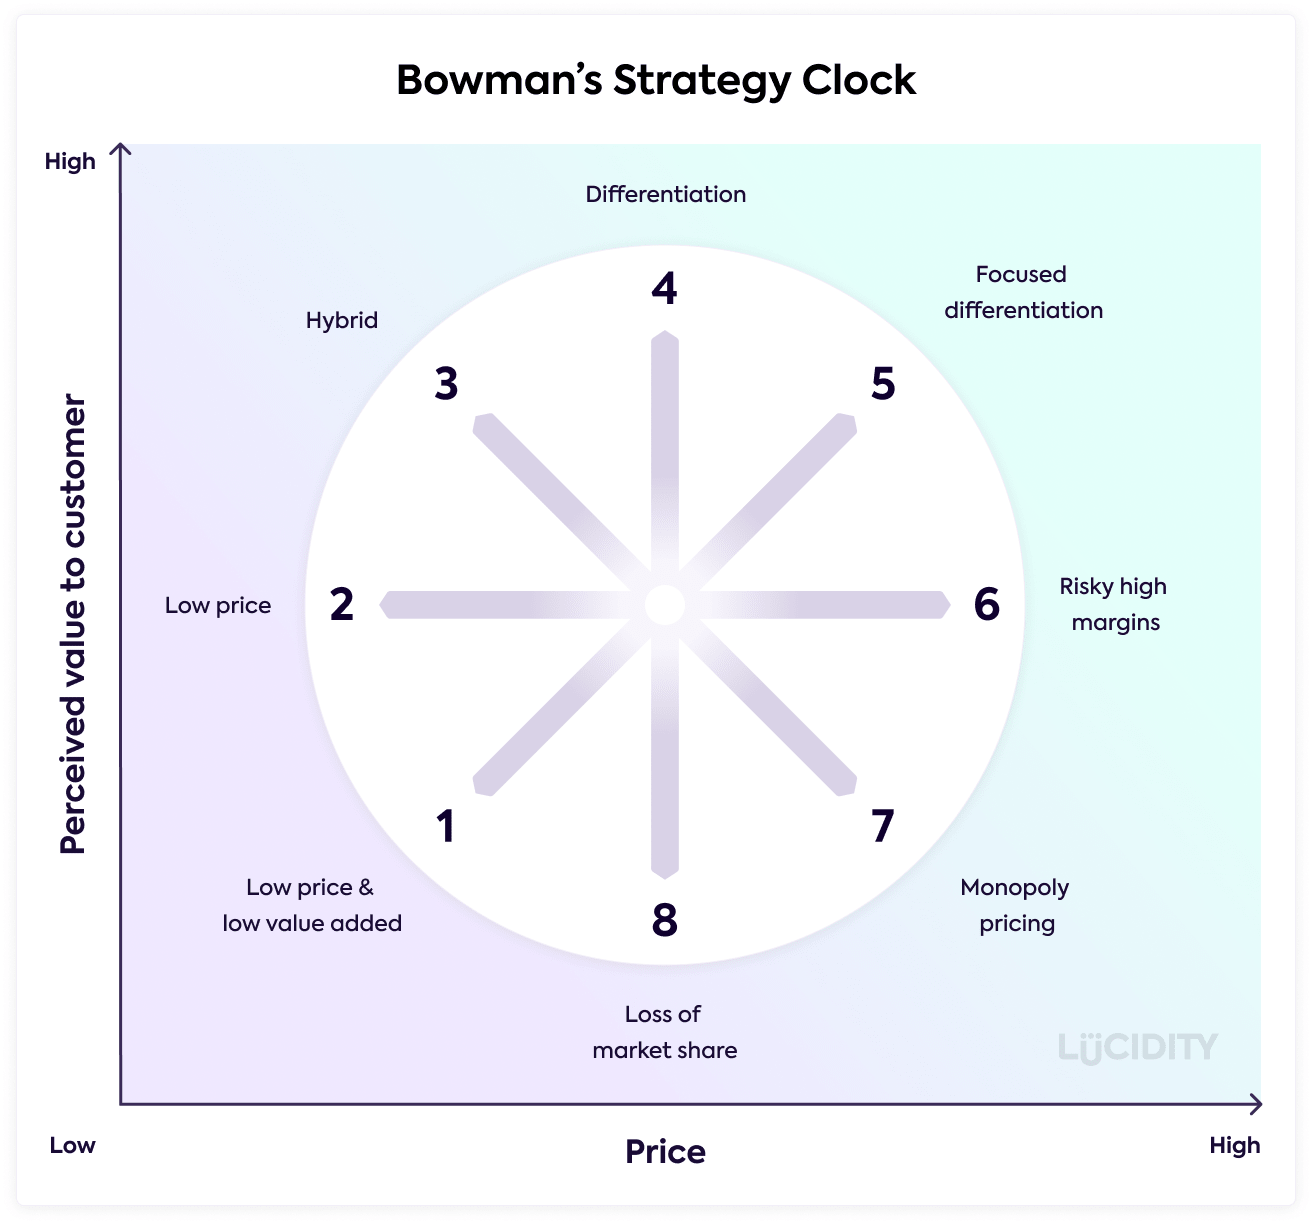 Bowman’s Strategy Clock for Tesla